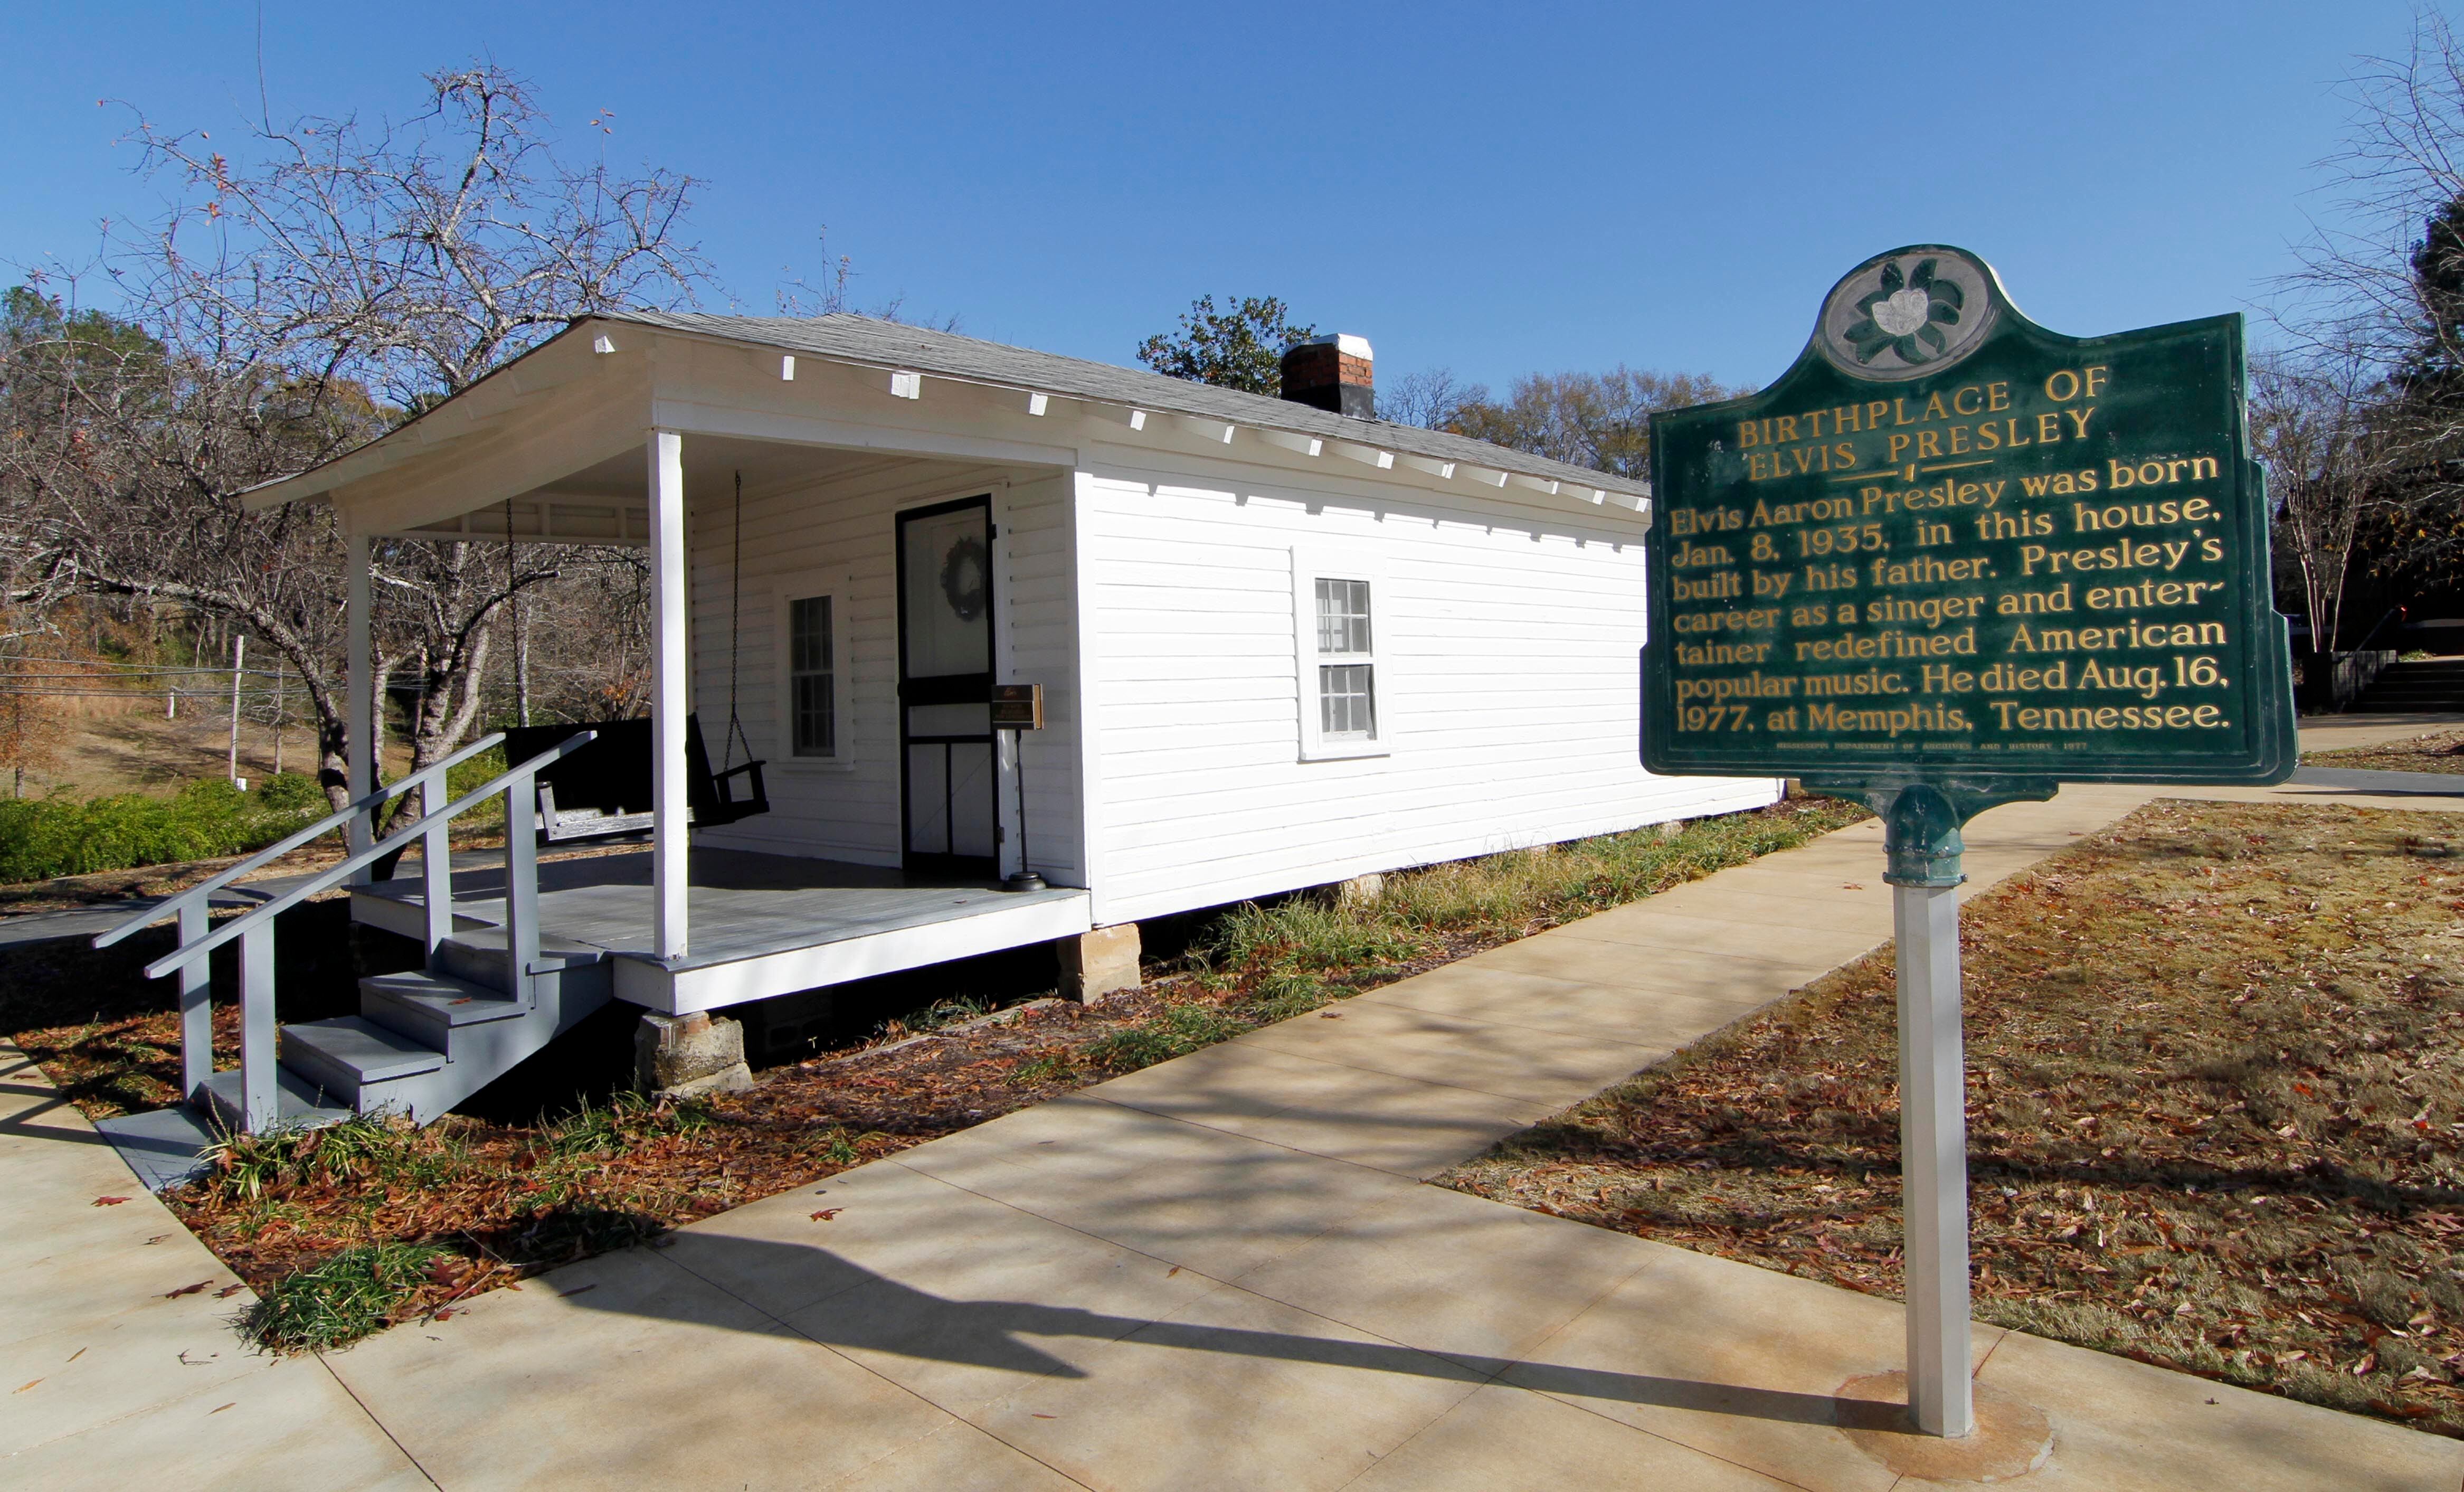 Elvis death anniversary increases tourism at his birthplace